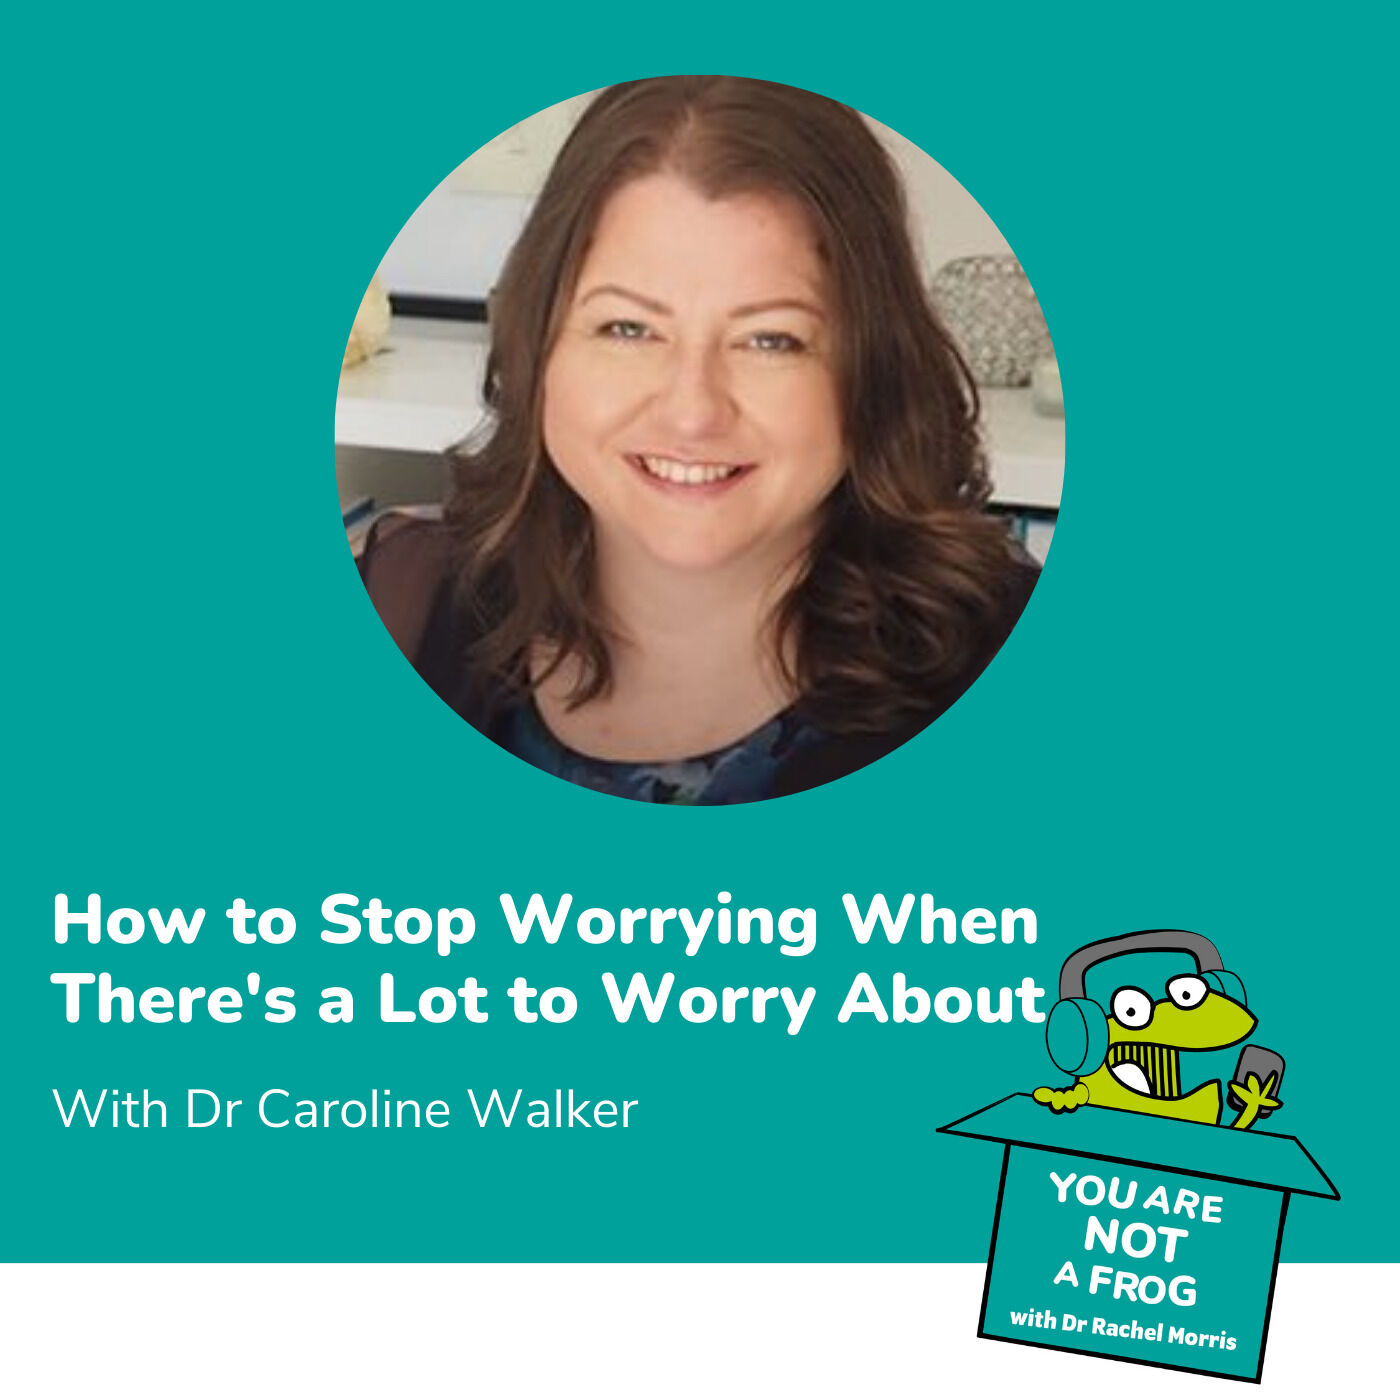 How to Stop Worrying When There’s a Lot to Worry About